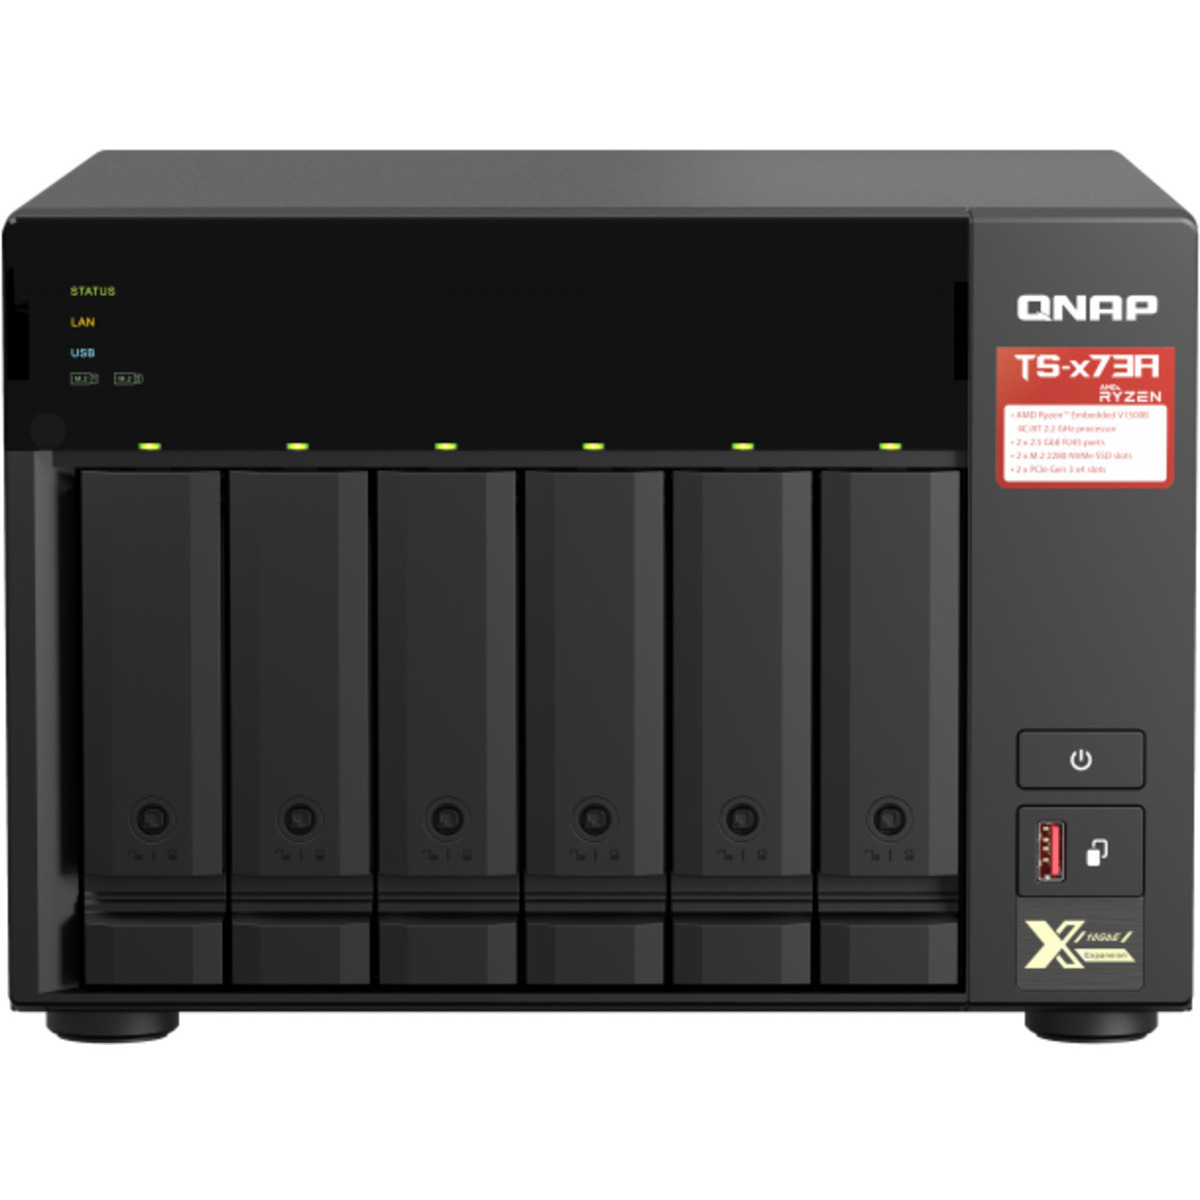 QNAP TS-673A 60tb 6-Bay Desktop Multimedia / Power User / Business NAS - Network Attached Storage Device 5x12tb Seagate IronWolf Pro ST12000NT001 3.5 7200rpm SATA 6Gb/s HDD NAS Class Drives Installed - Burn-In Tested - ON SALE TS-673A